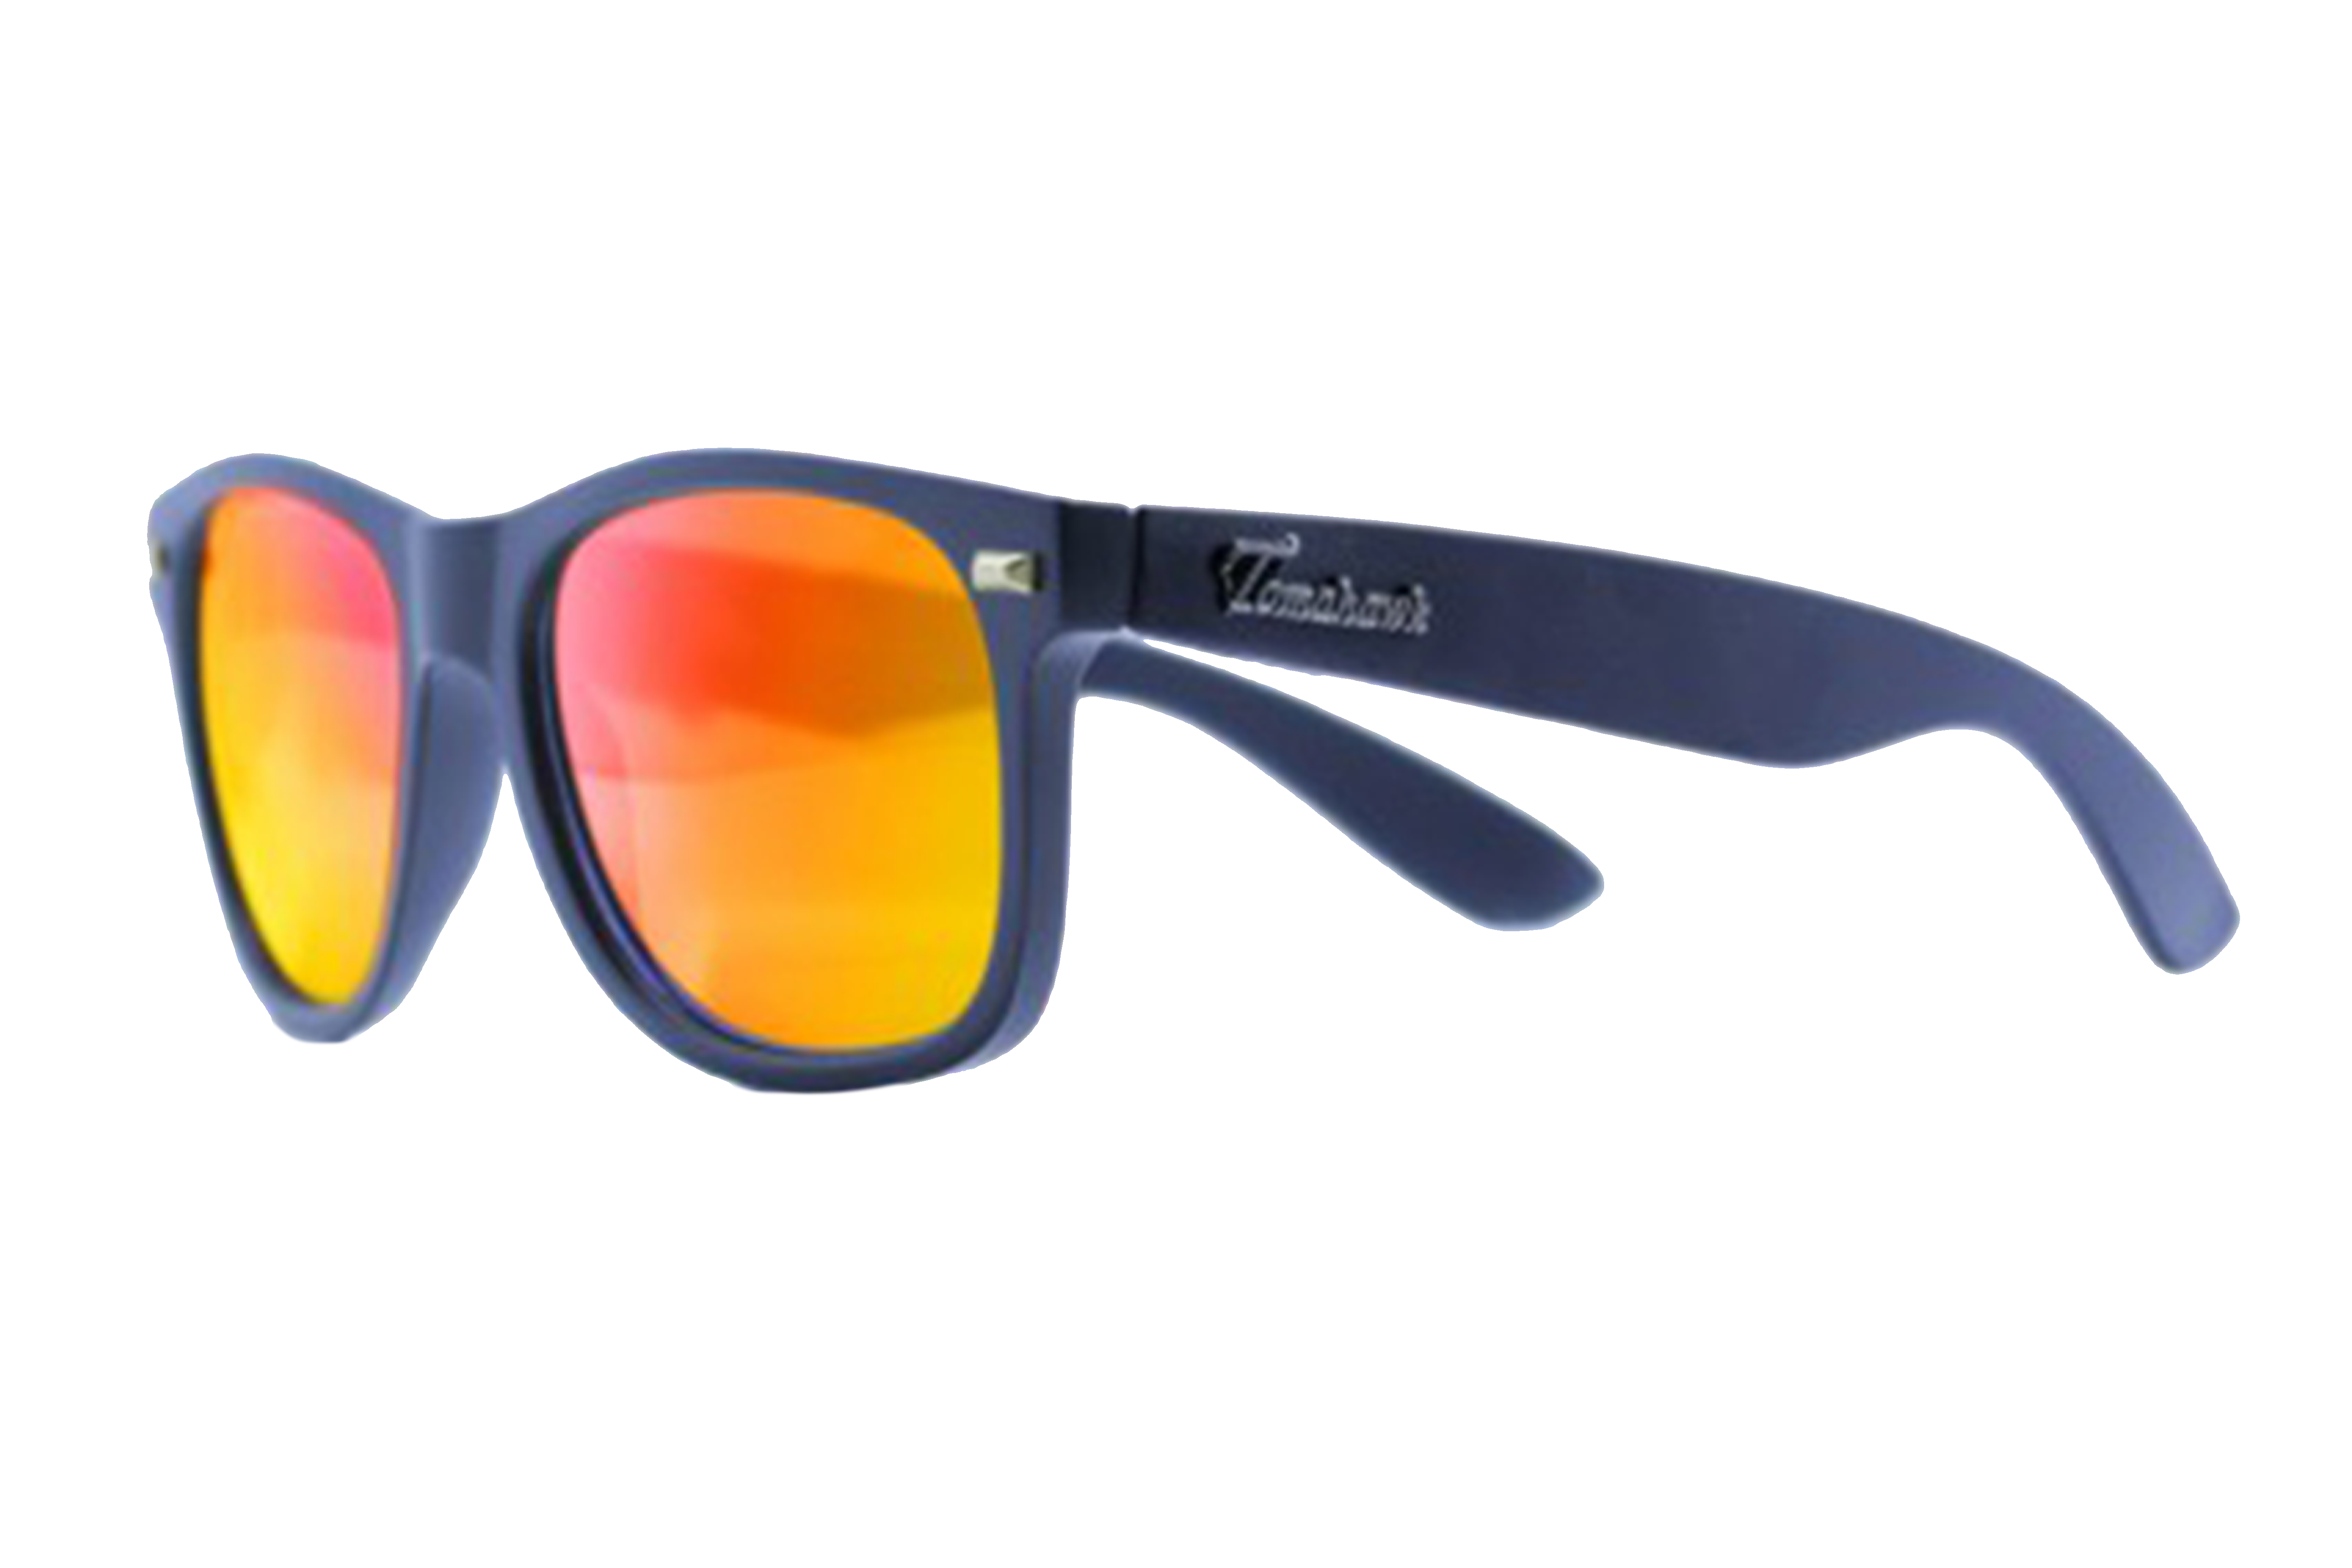 Sunglasses, polarized and with UV protection - Tomahawk Suriname